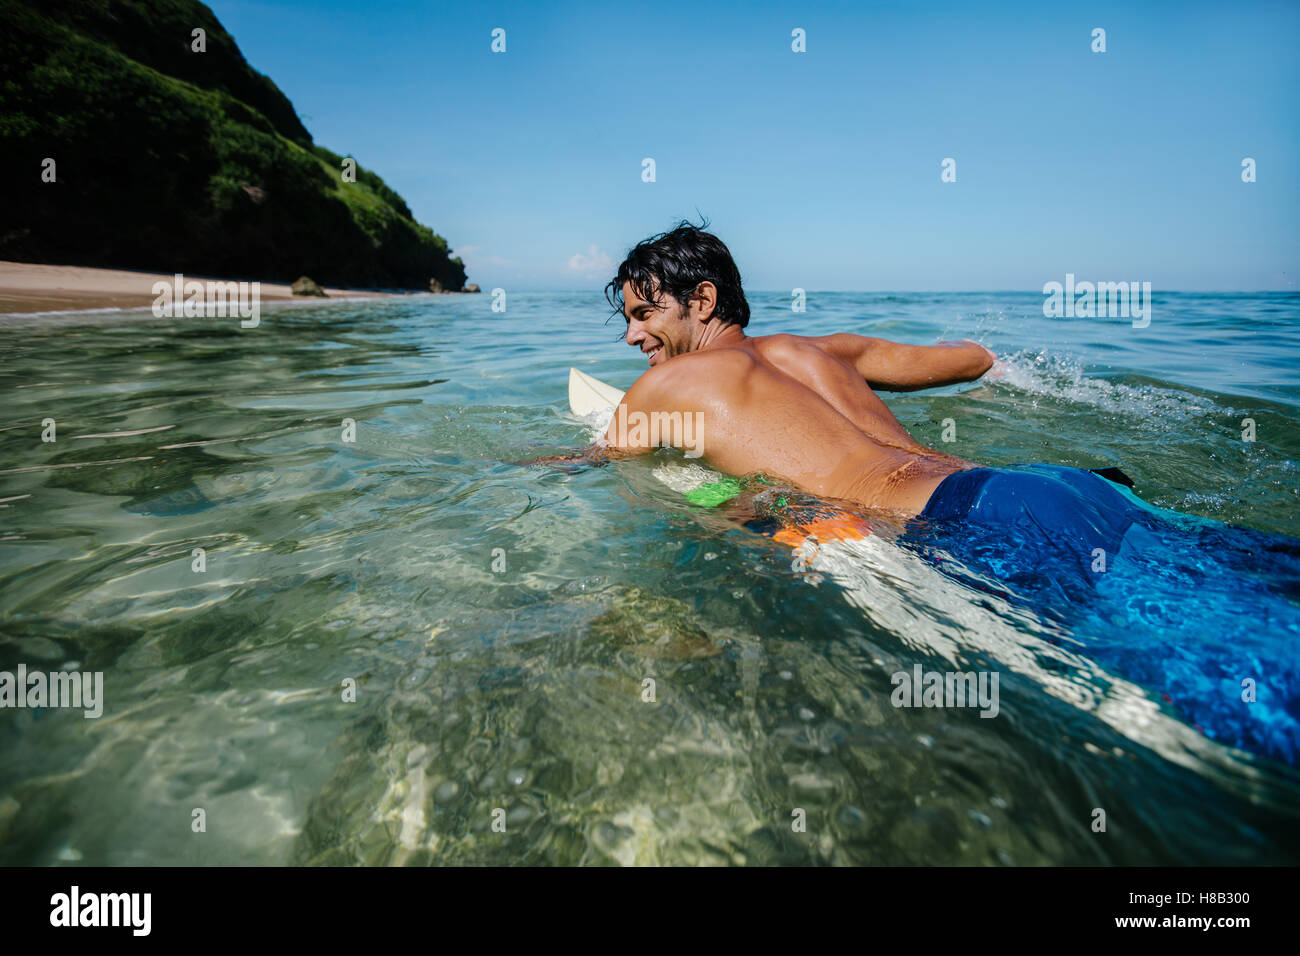 Shot of young man water surfing in sea. Male surfer in the ocean water with surf board. Enjoying holidays. Stock Photo